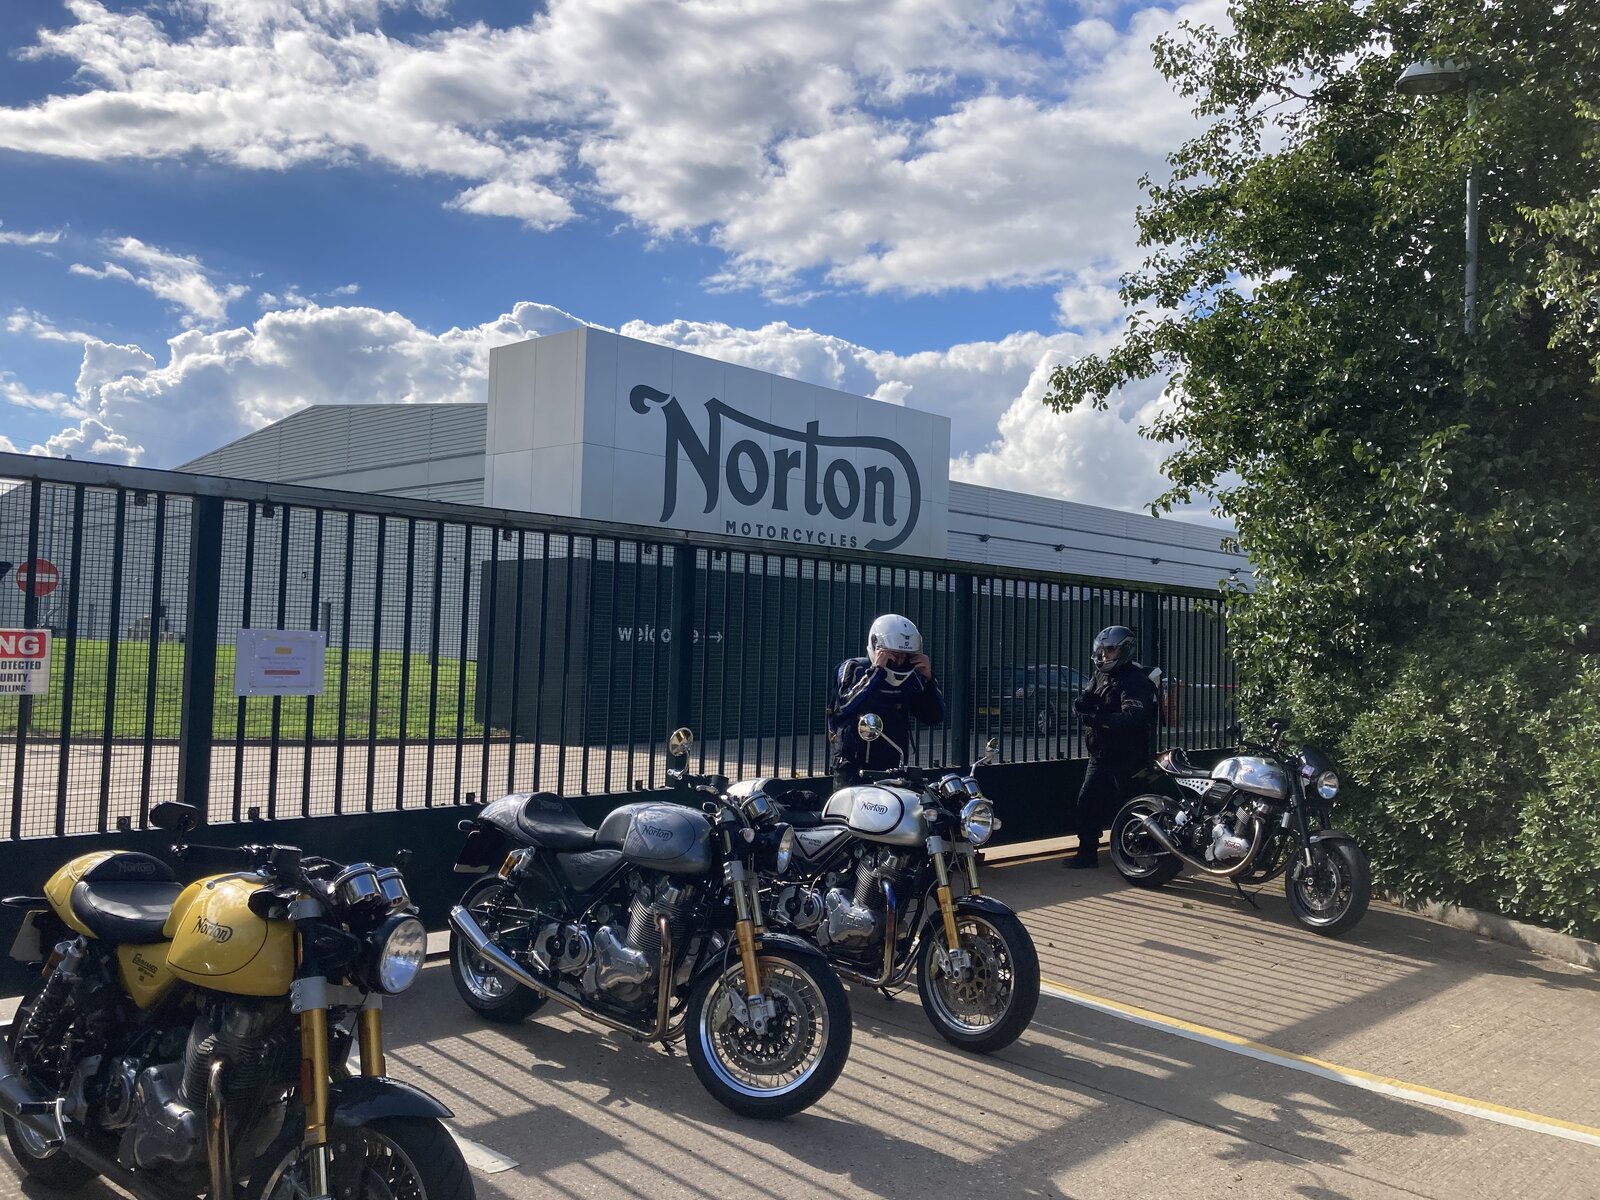 New to Norton looking at purchasing a 2013 Norton 961